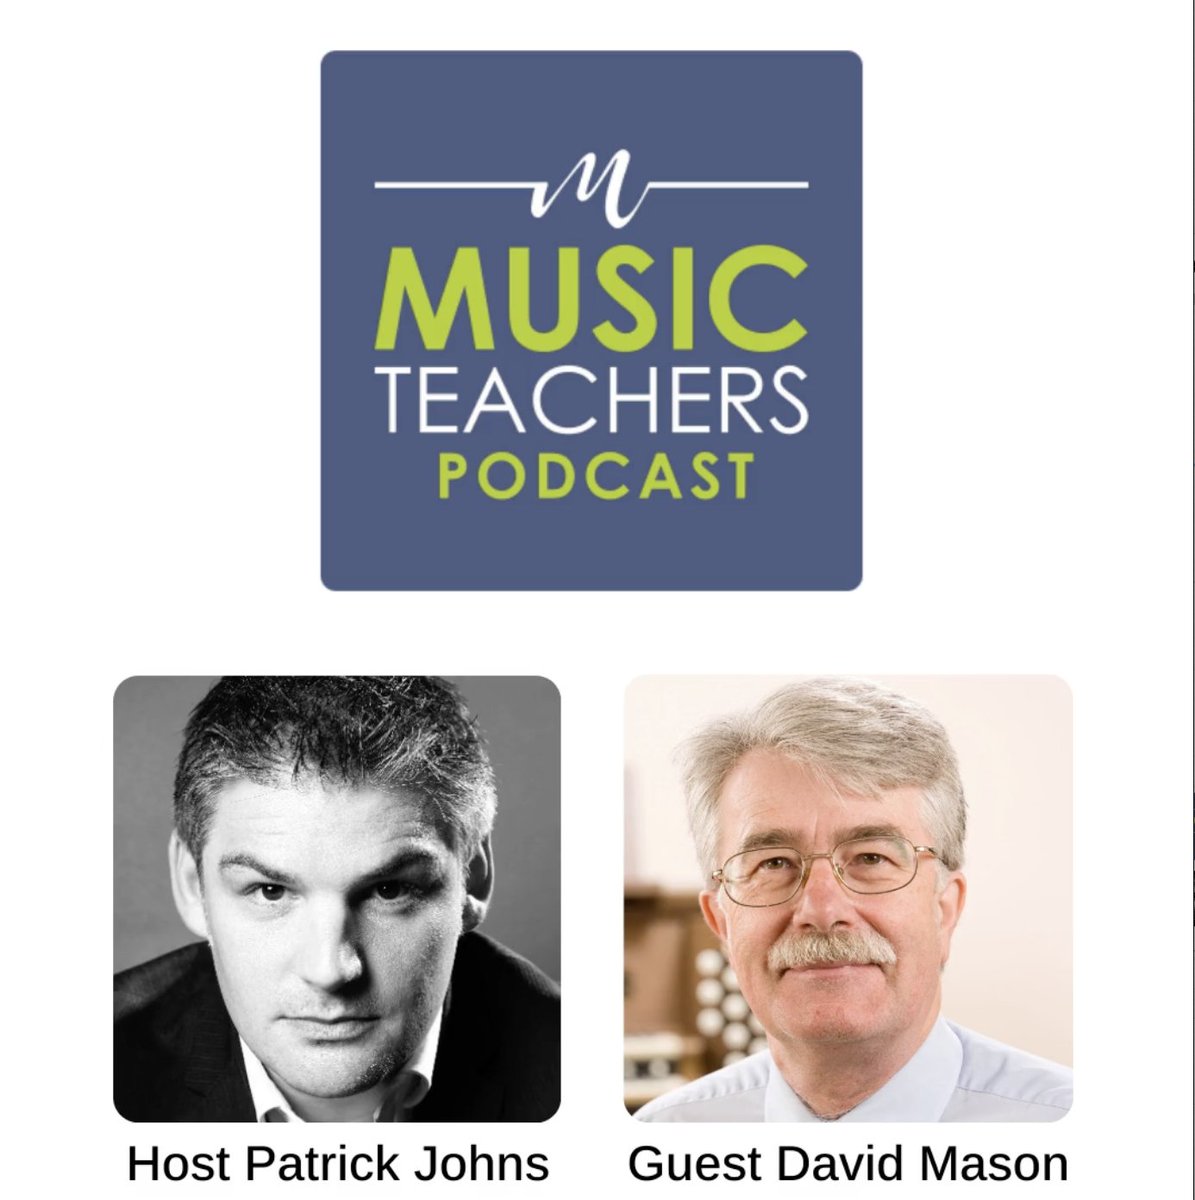 You can hear David Mason talking to @MrPatrickJohns, ahead of the @MusicTeachers_ annual conference, on the Music Teacher's Podcast. David is an avid organist and has been since he was 12yrs old. Interview starts at 22m 36s on EP96. Full episode here: musicteachers.org/podcast/